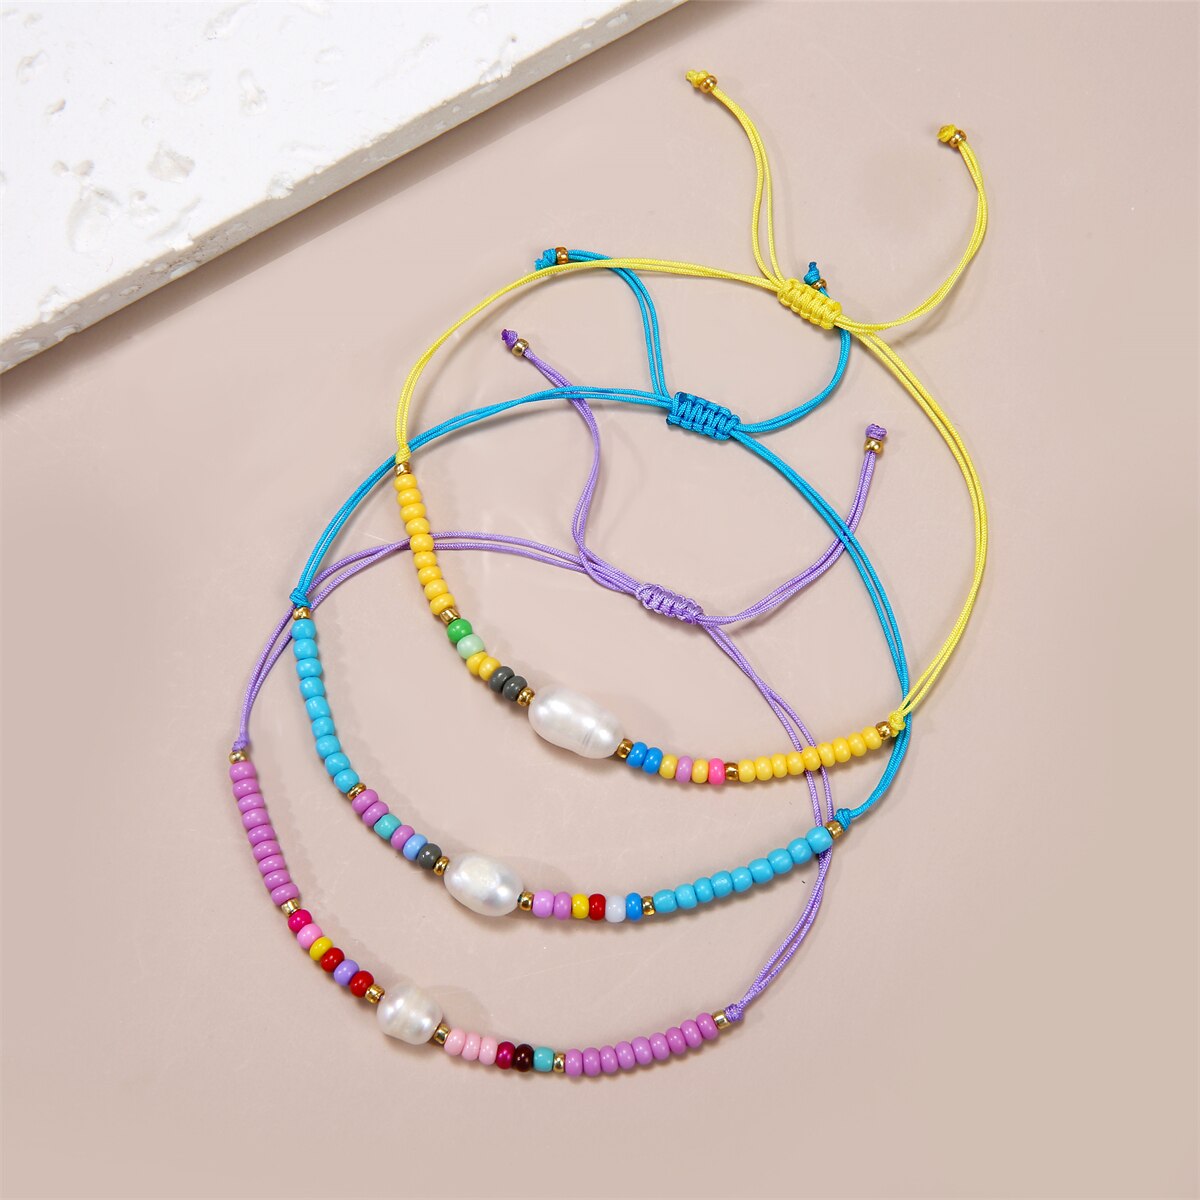 boho 12pcs/lot Colorful Czech Seed Beads Charms Bracelet Hand Woven Stackable Pearl Pendant Anklets Bracelets Jewelry Gift